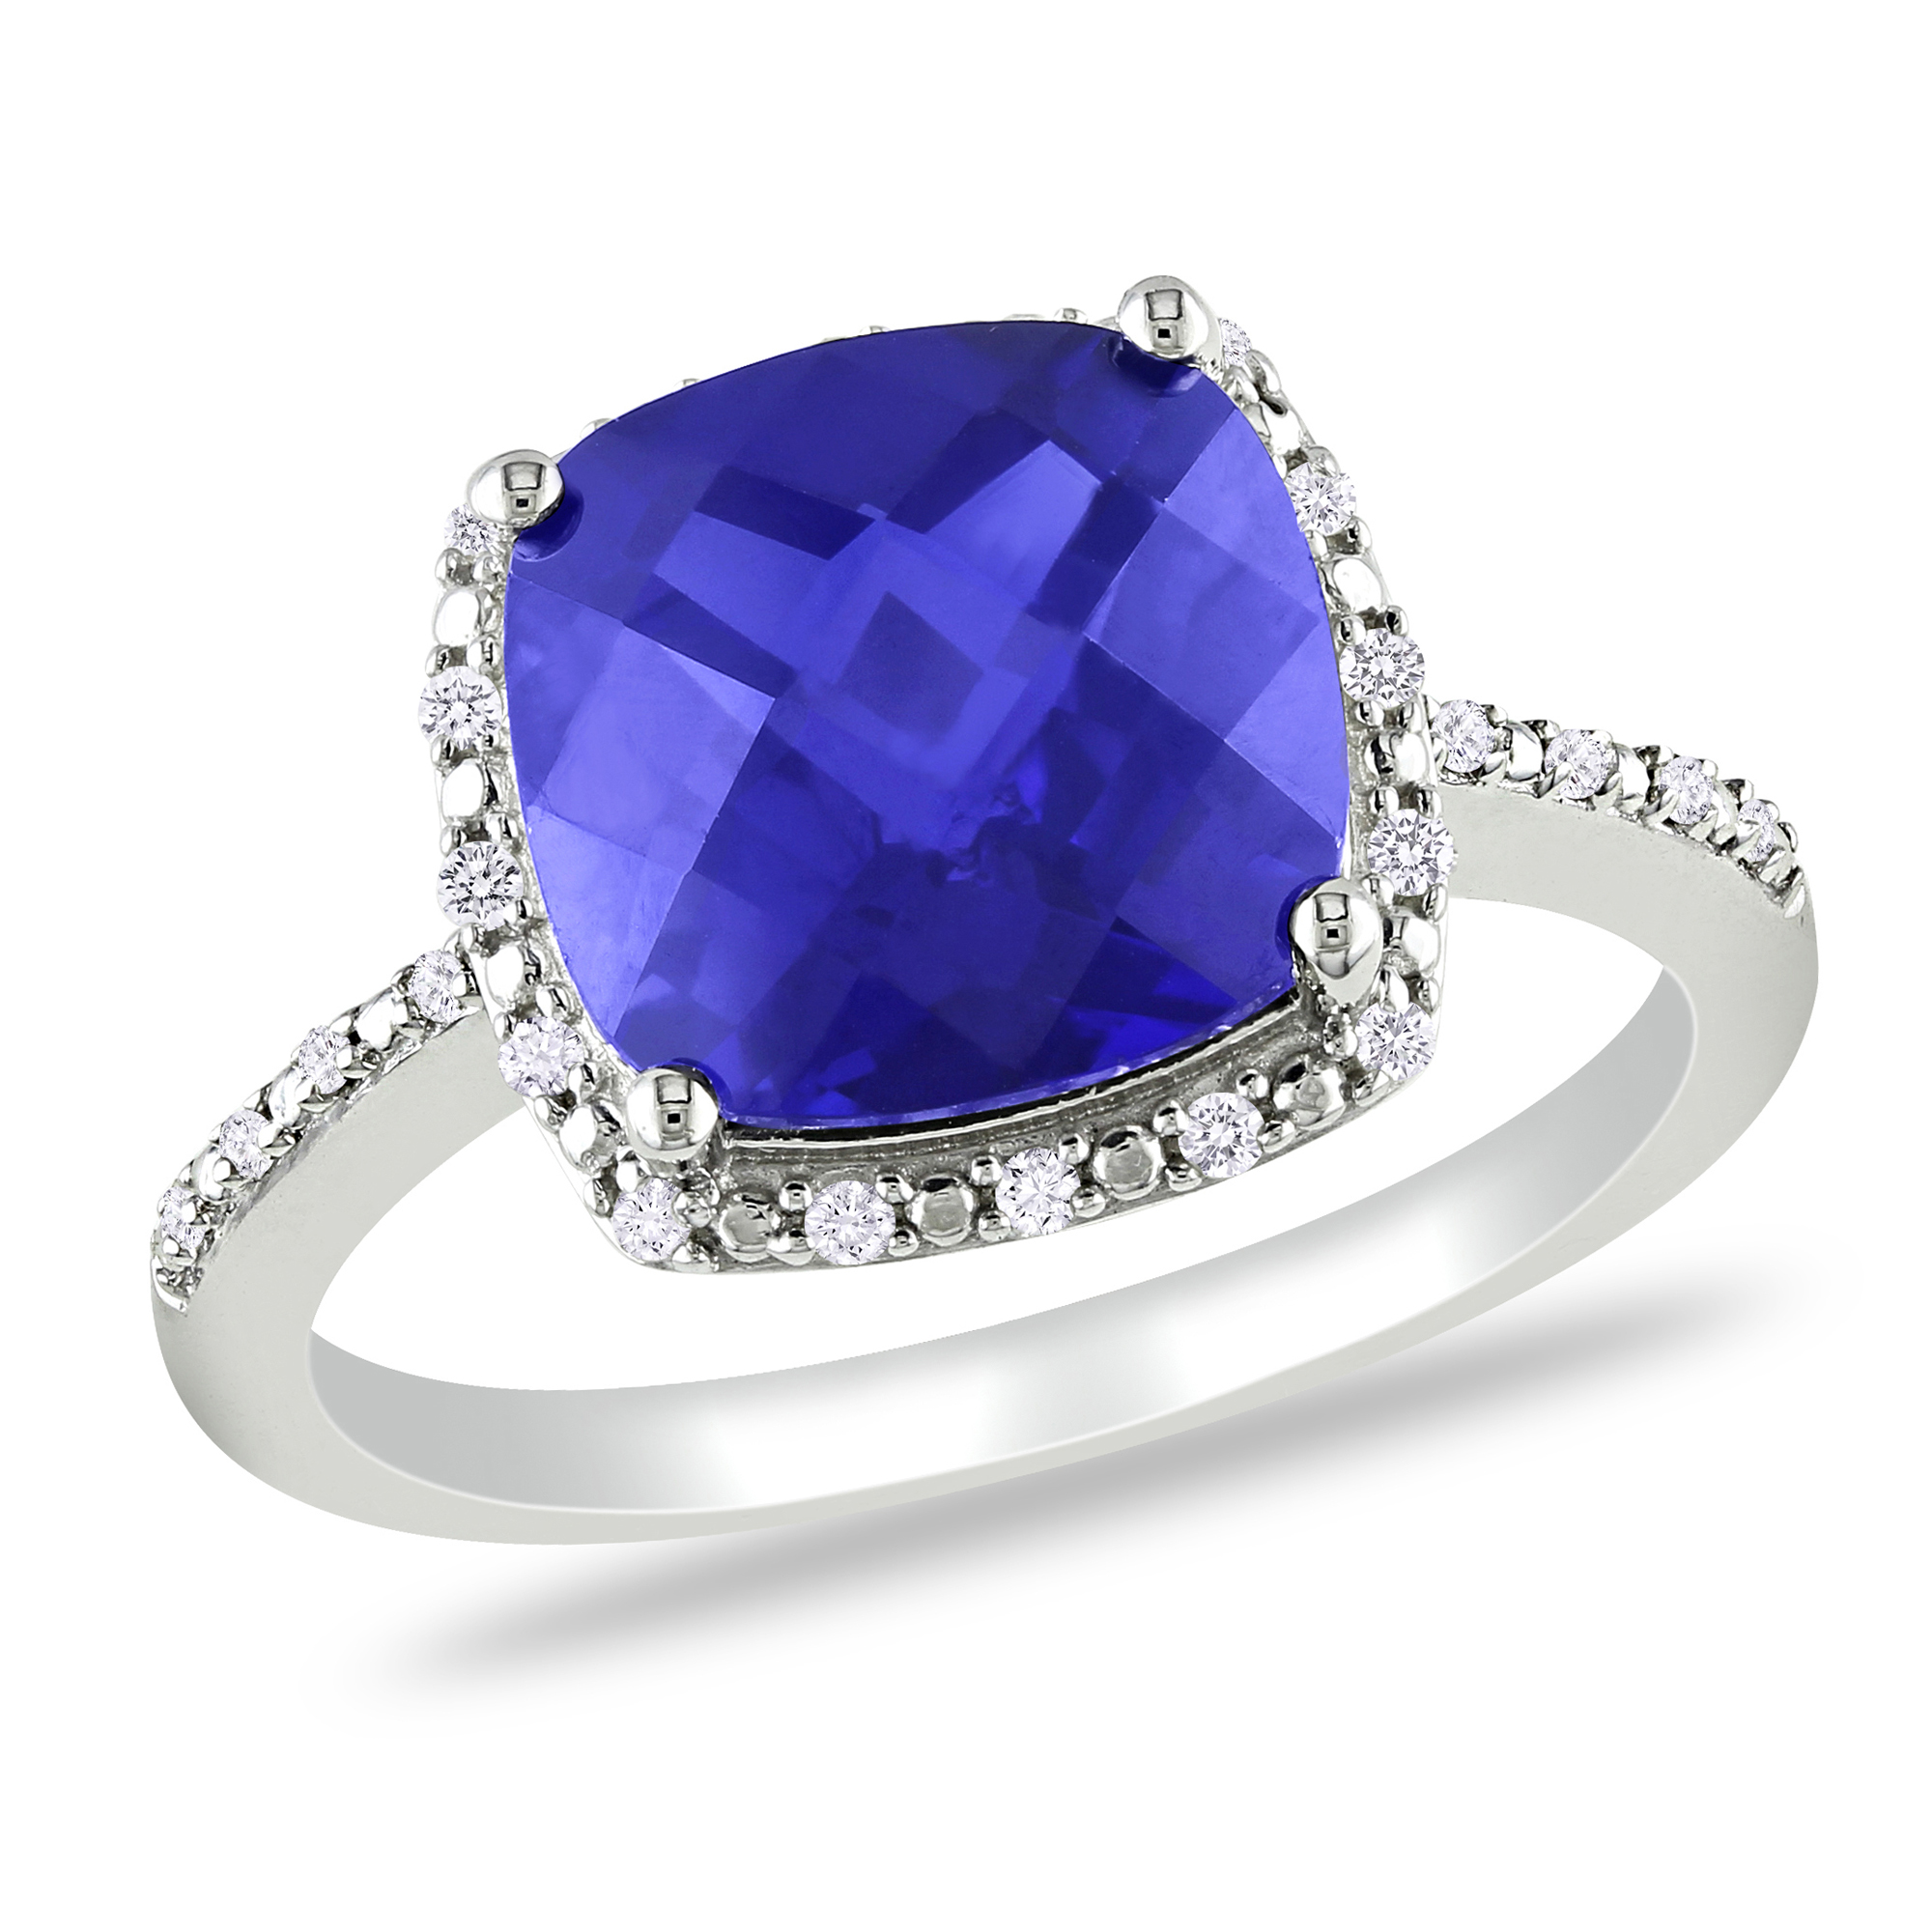 Amour 1/10 Carat T.W. Diamond and 5 3/4 Carat T.G.W. Created Blue Sapphire Fashion Ring in Sterling Silver GH I2;I3